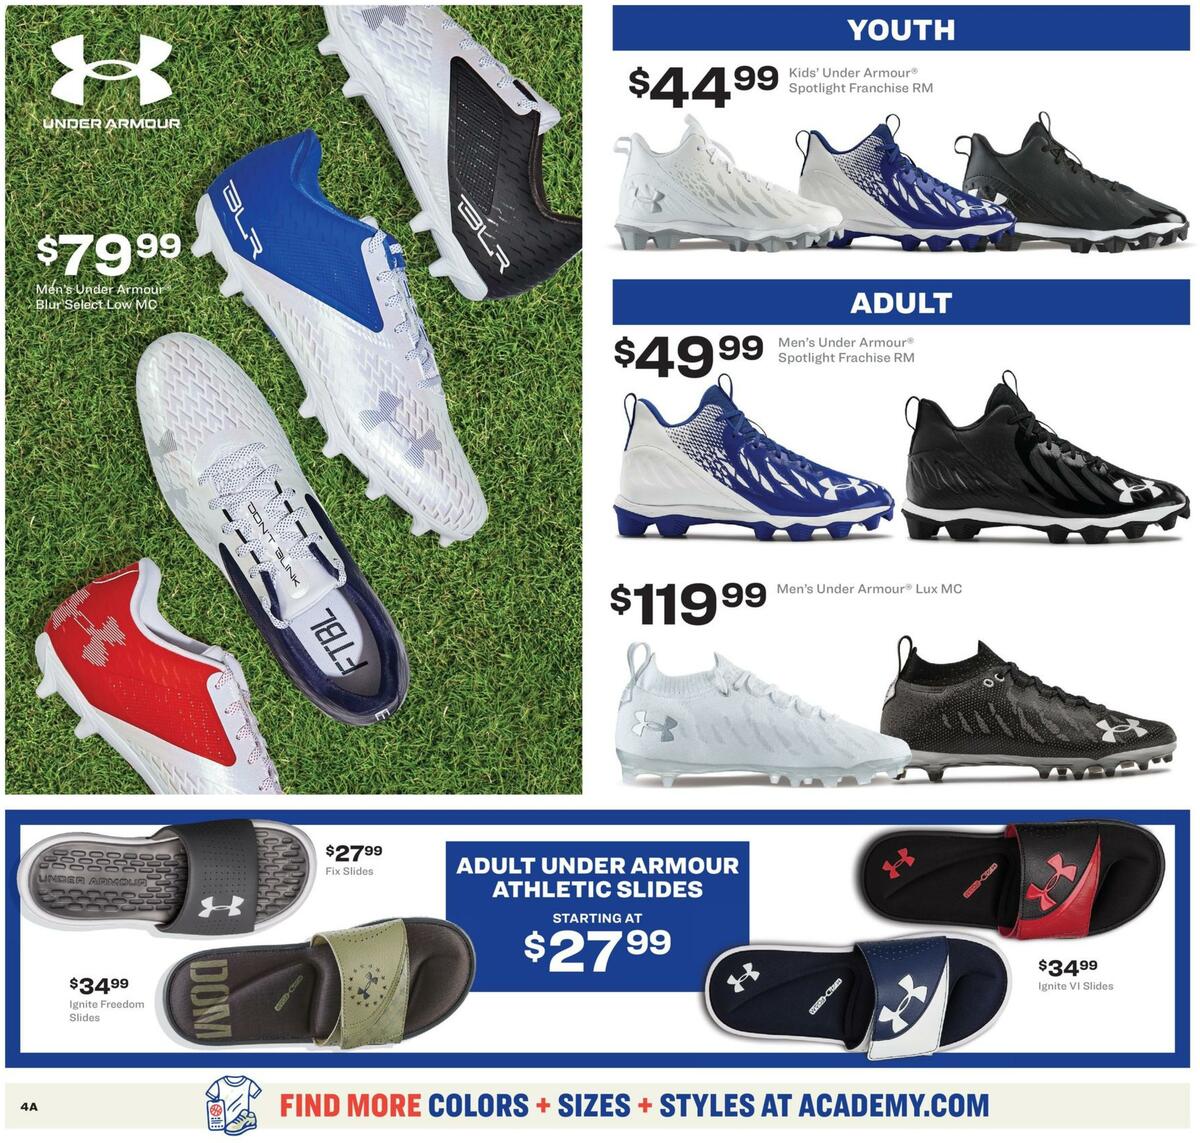 Academy Sports + Outdoors Sports Ad Weekly Ad from June 22